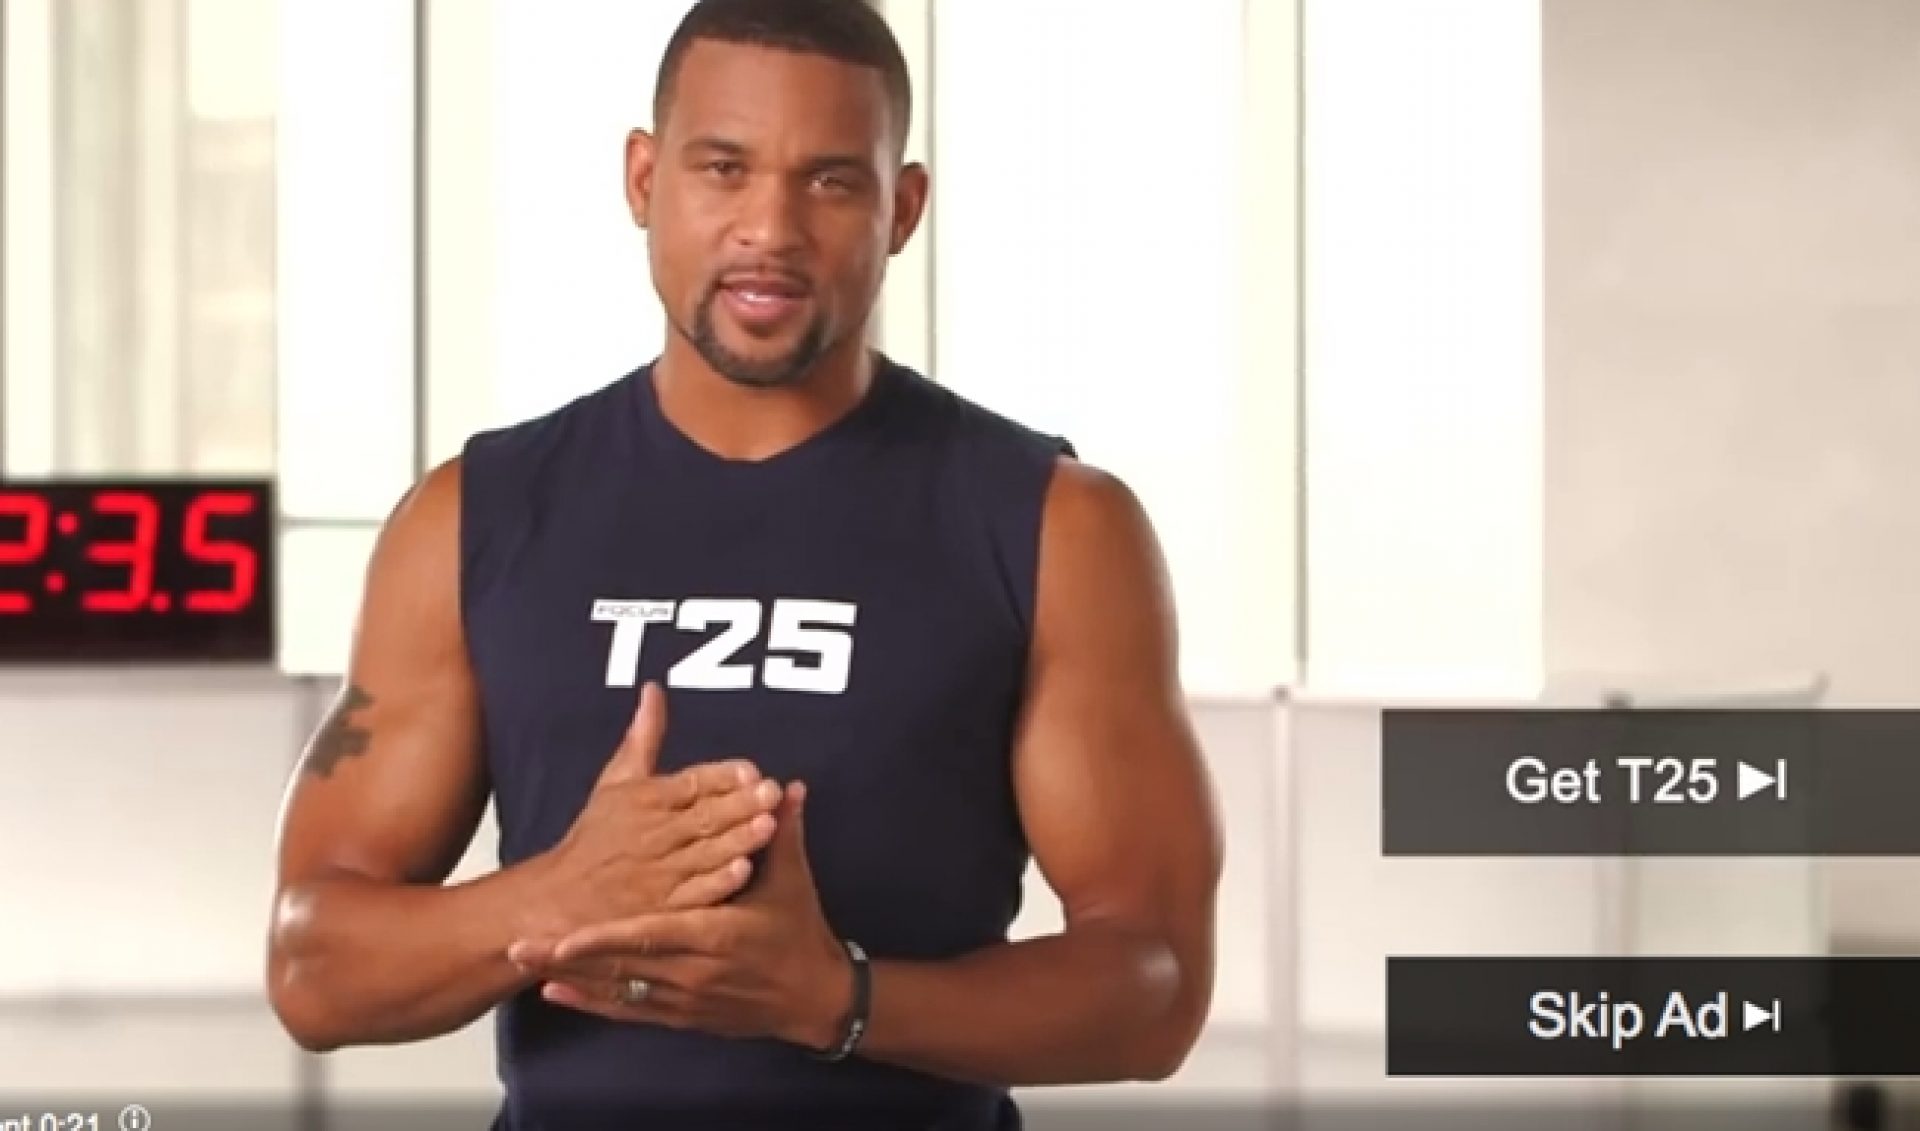 Is Home Fitness Company Beachbody Gaming YouTube’s Skippable Pre-Roll Ads?